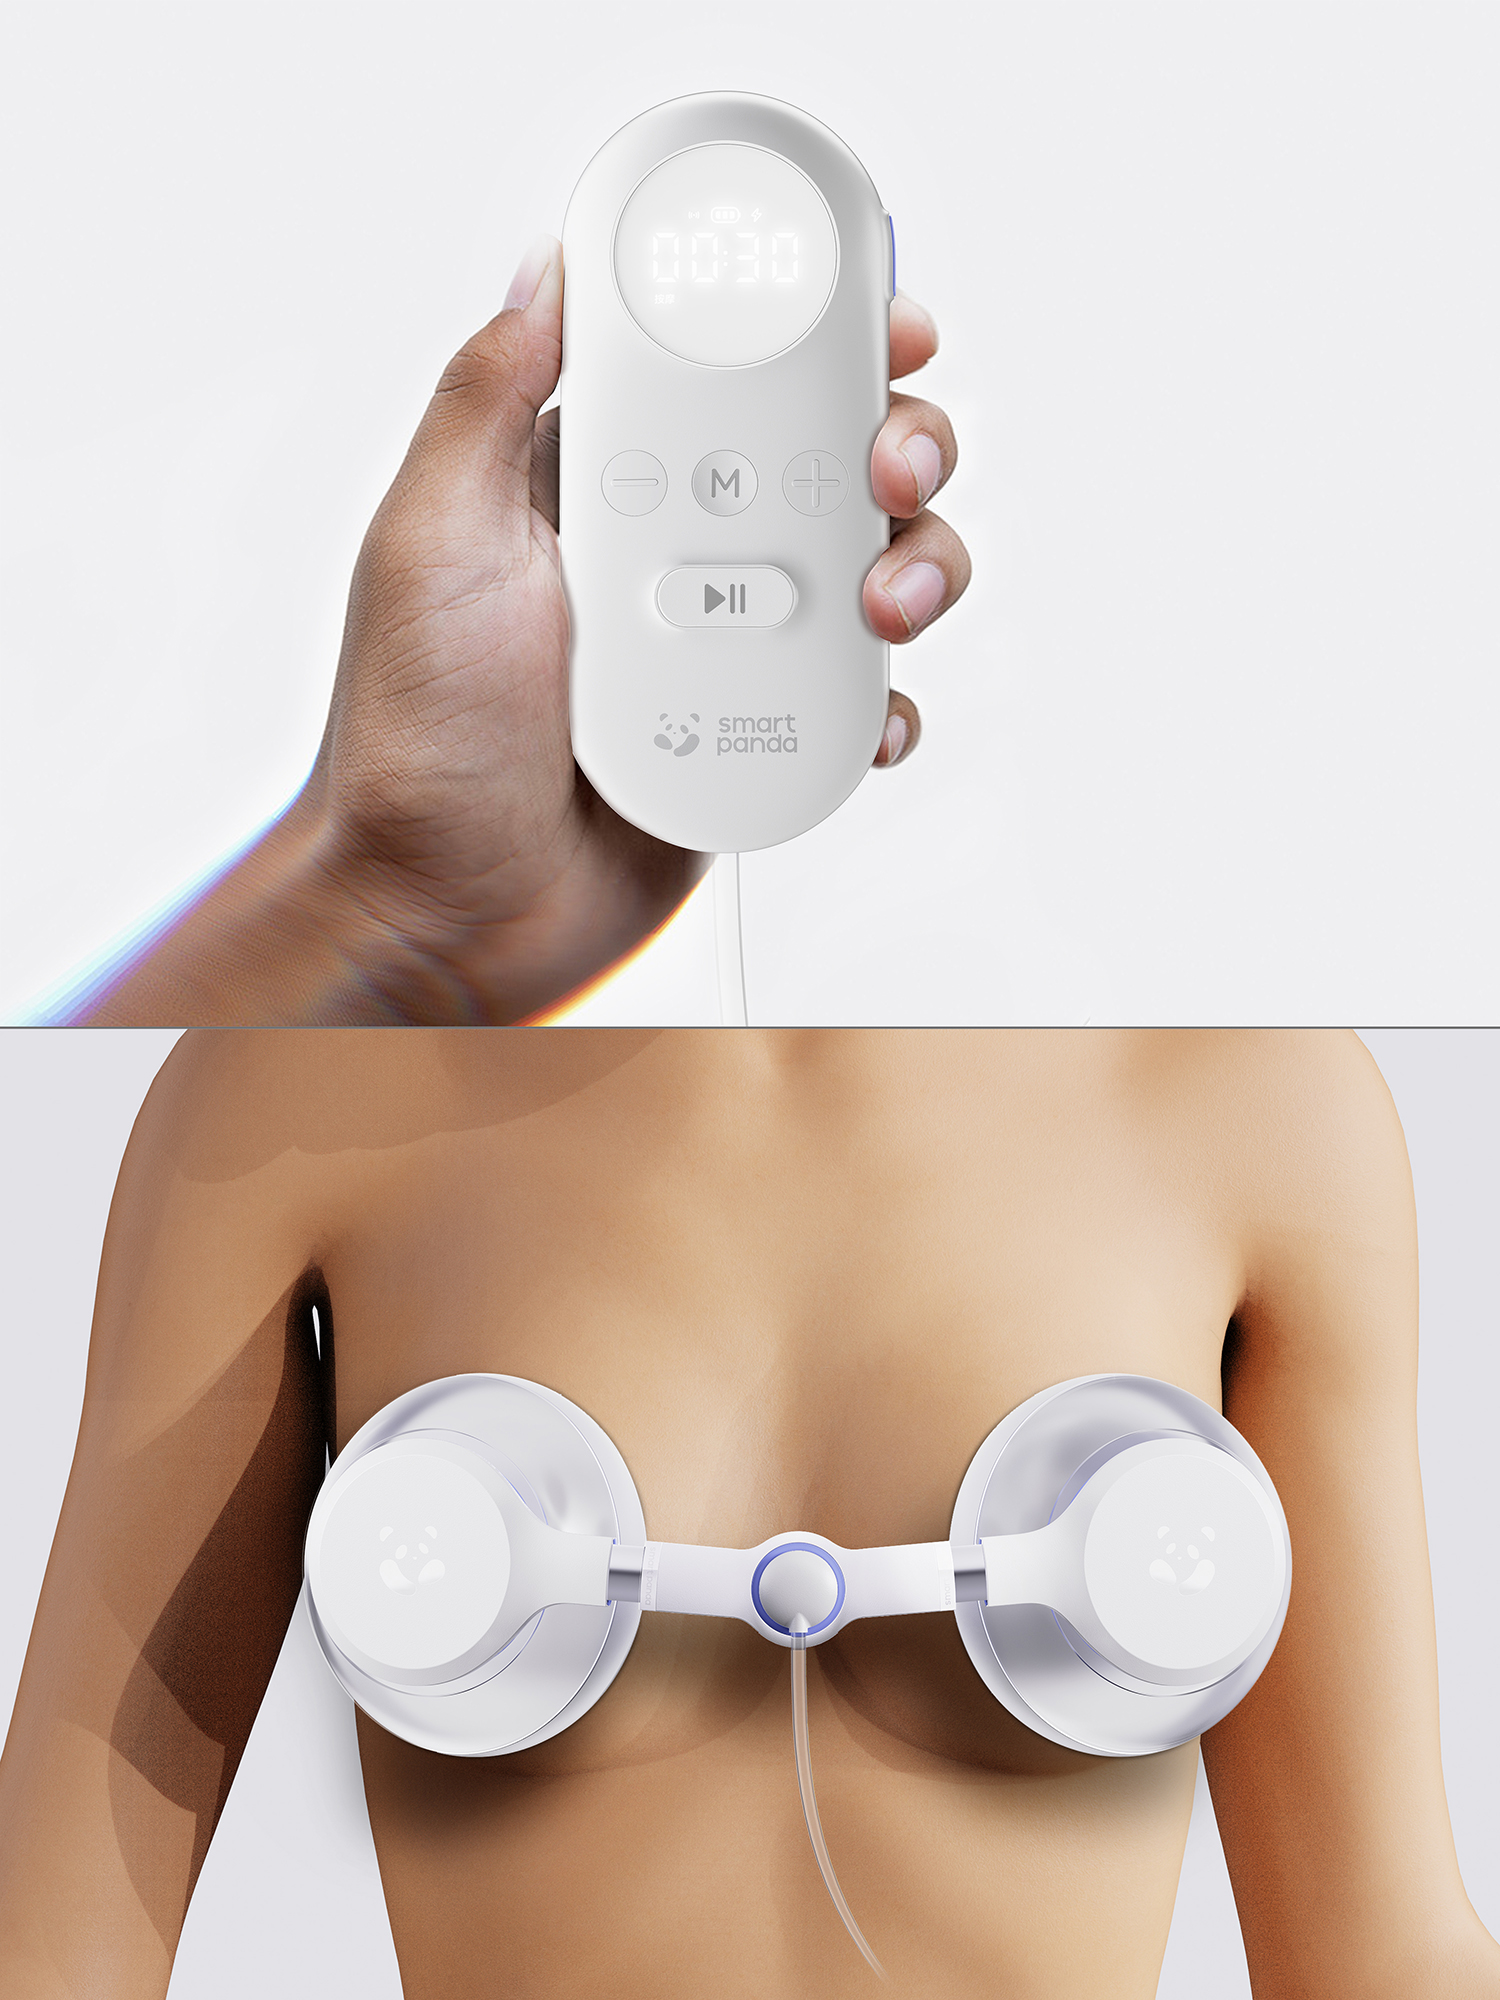 Freestyle Hands-Free Breast Pump